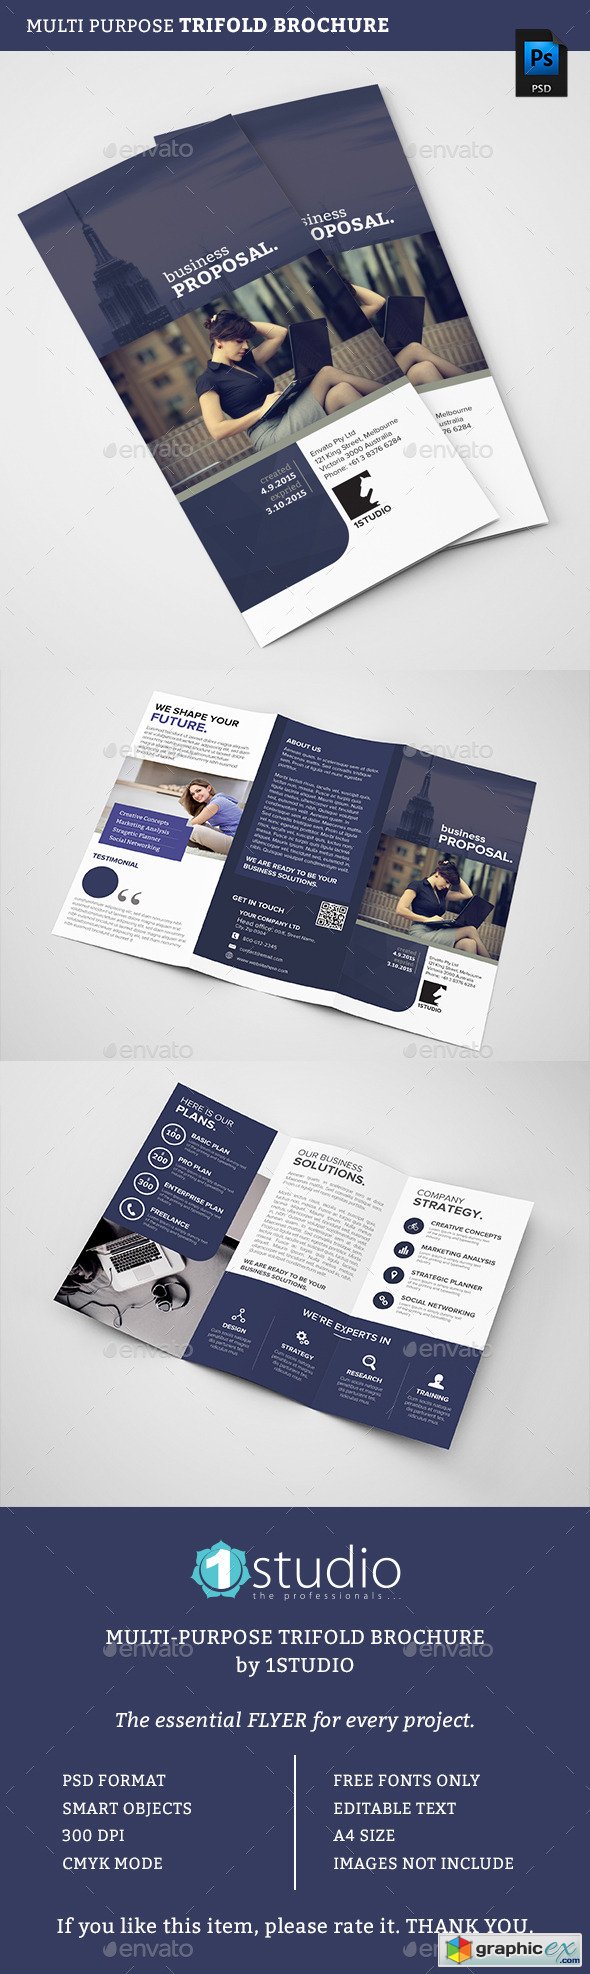 Trifold Brochure 12776450